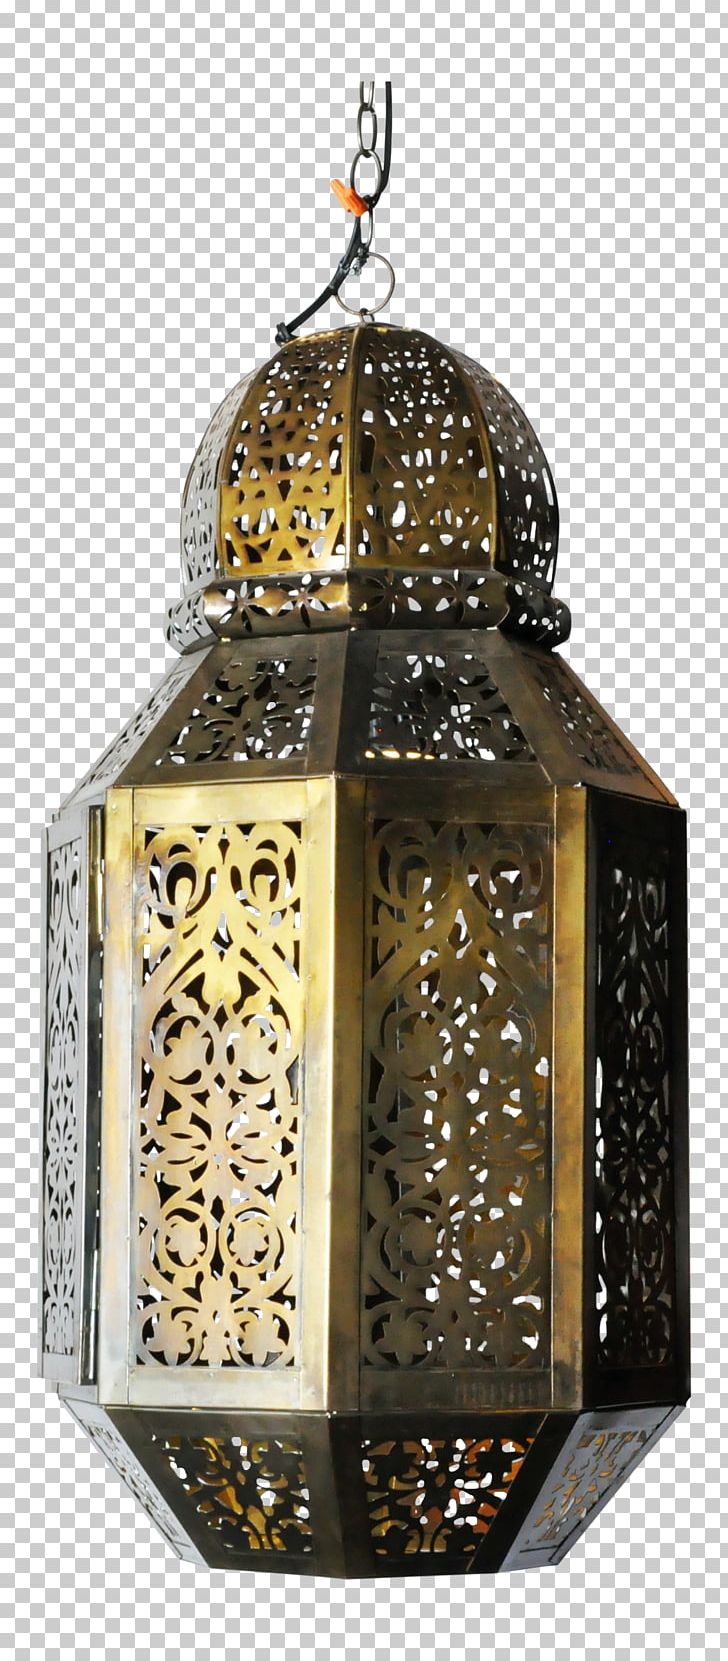 Fes Moroccan Cuisine Lantern Moroccan Style Light Fixture PNG, Clipart, Ceiling, Ceiling Fixture, Copper, Egg, Fes Free PNG Download